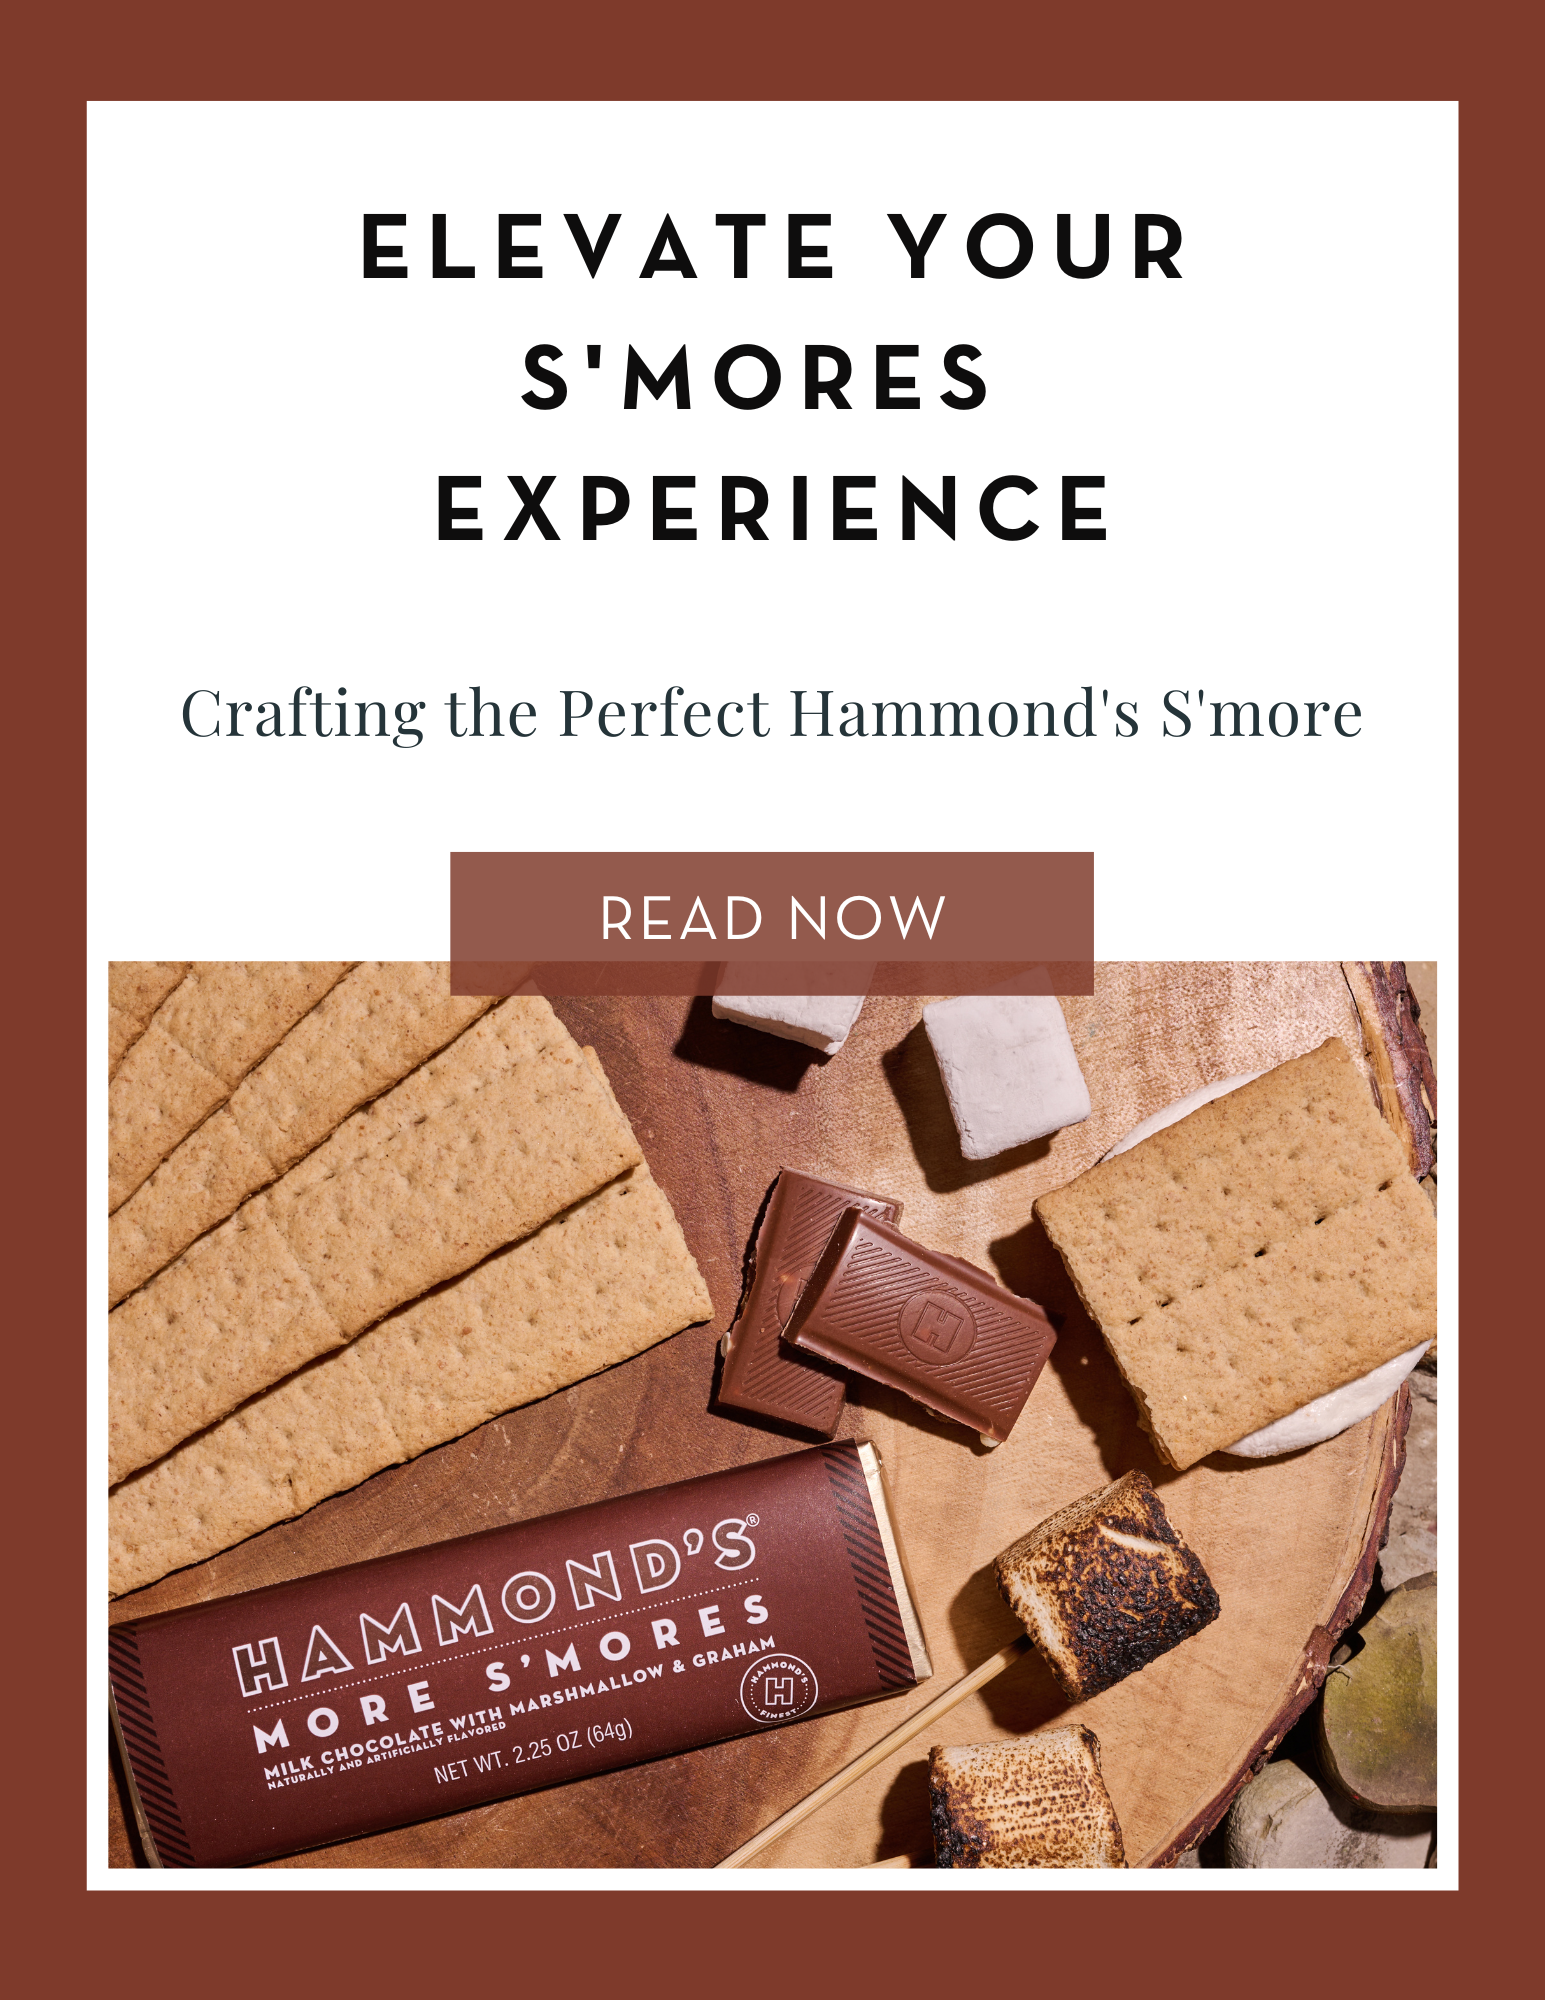 ELEVATE YOUR SMORES EXPERIENCE